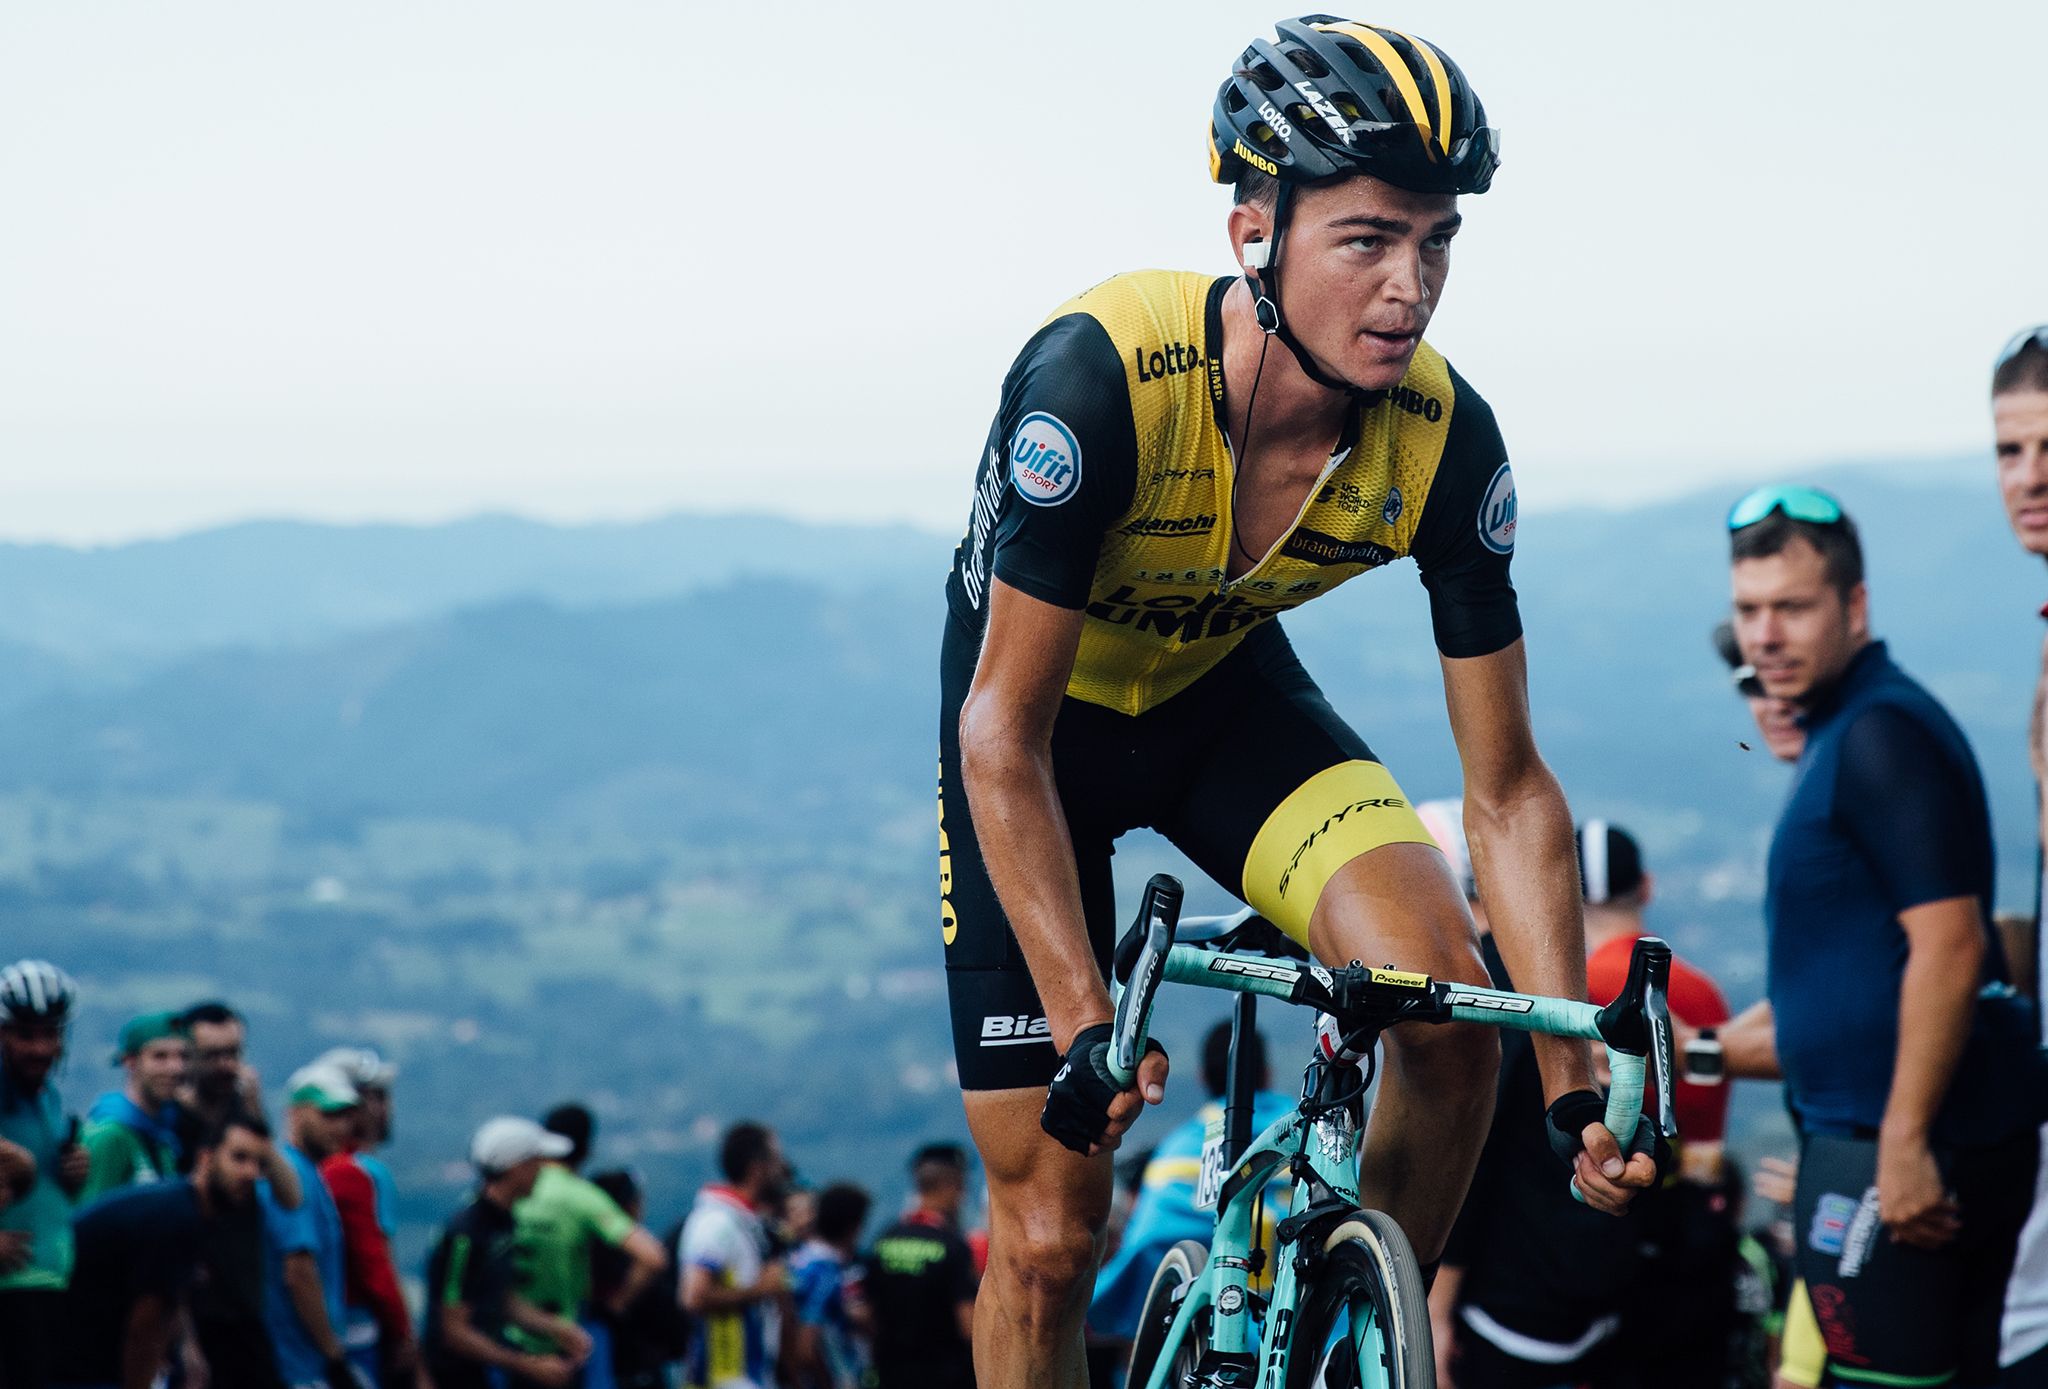 Top Men's Riders of 2022 - Cyclists to Watch This Pro Season